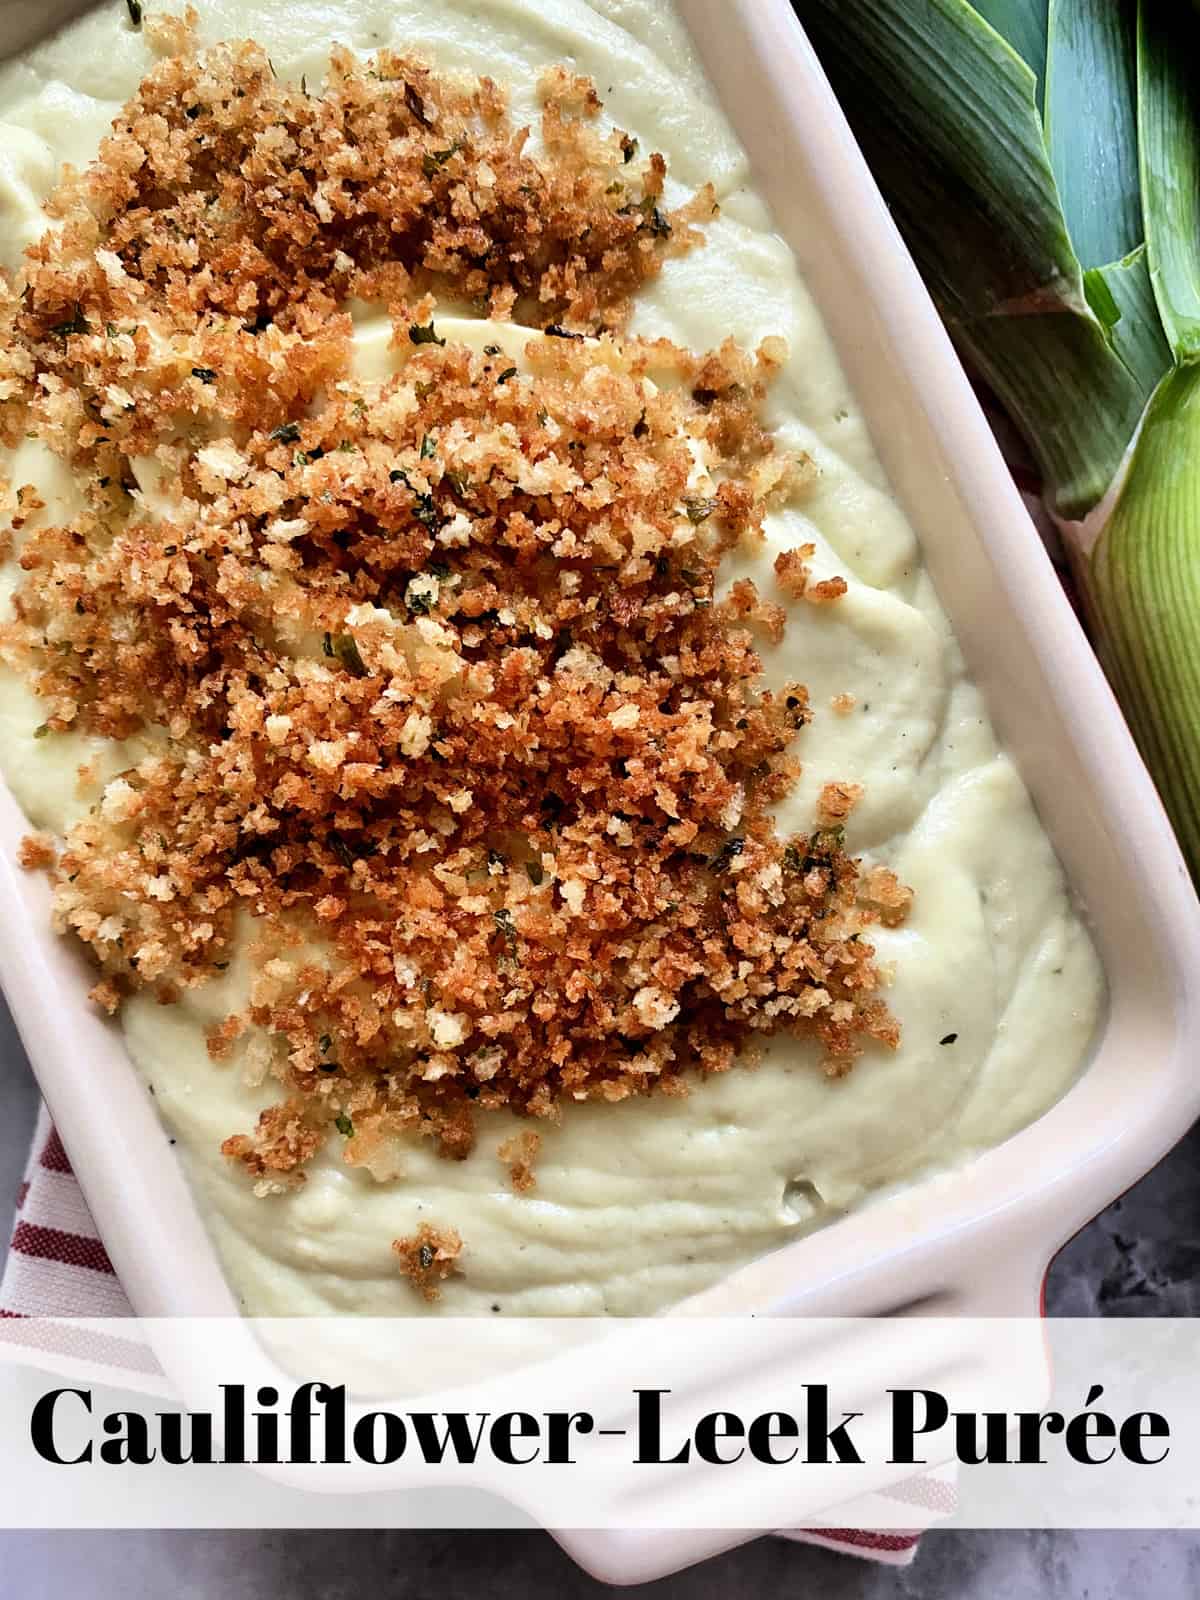 Closeup of white puree topped with panko bread crumbs and herbs with title text.